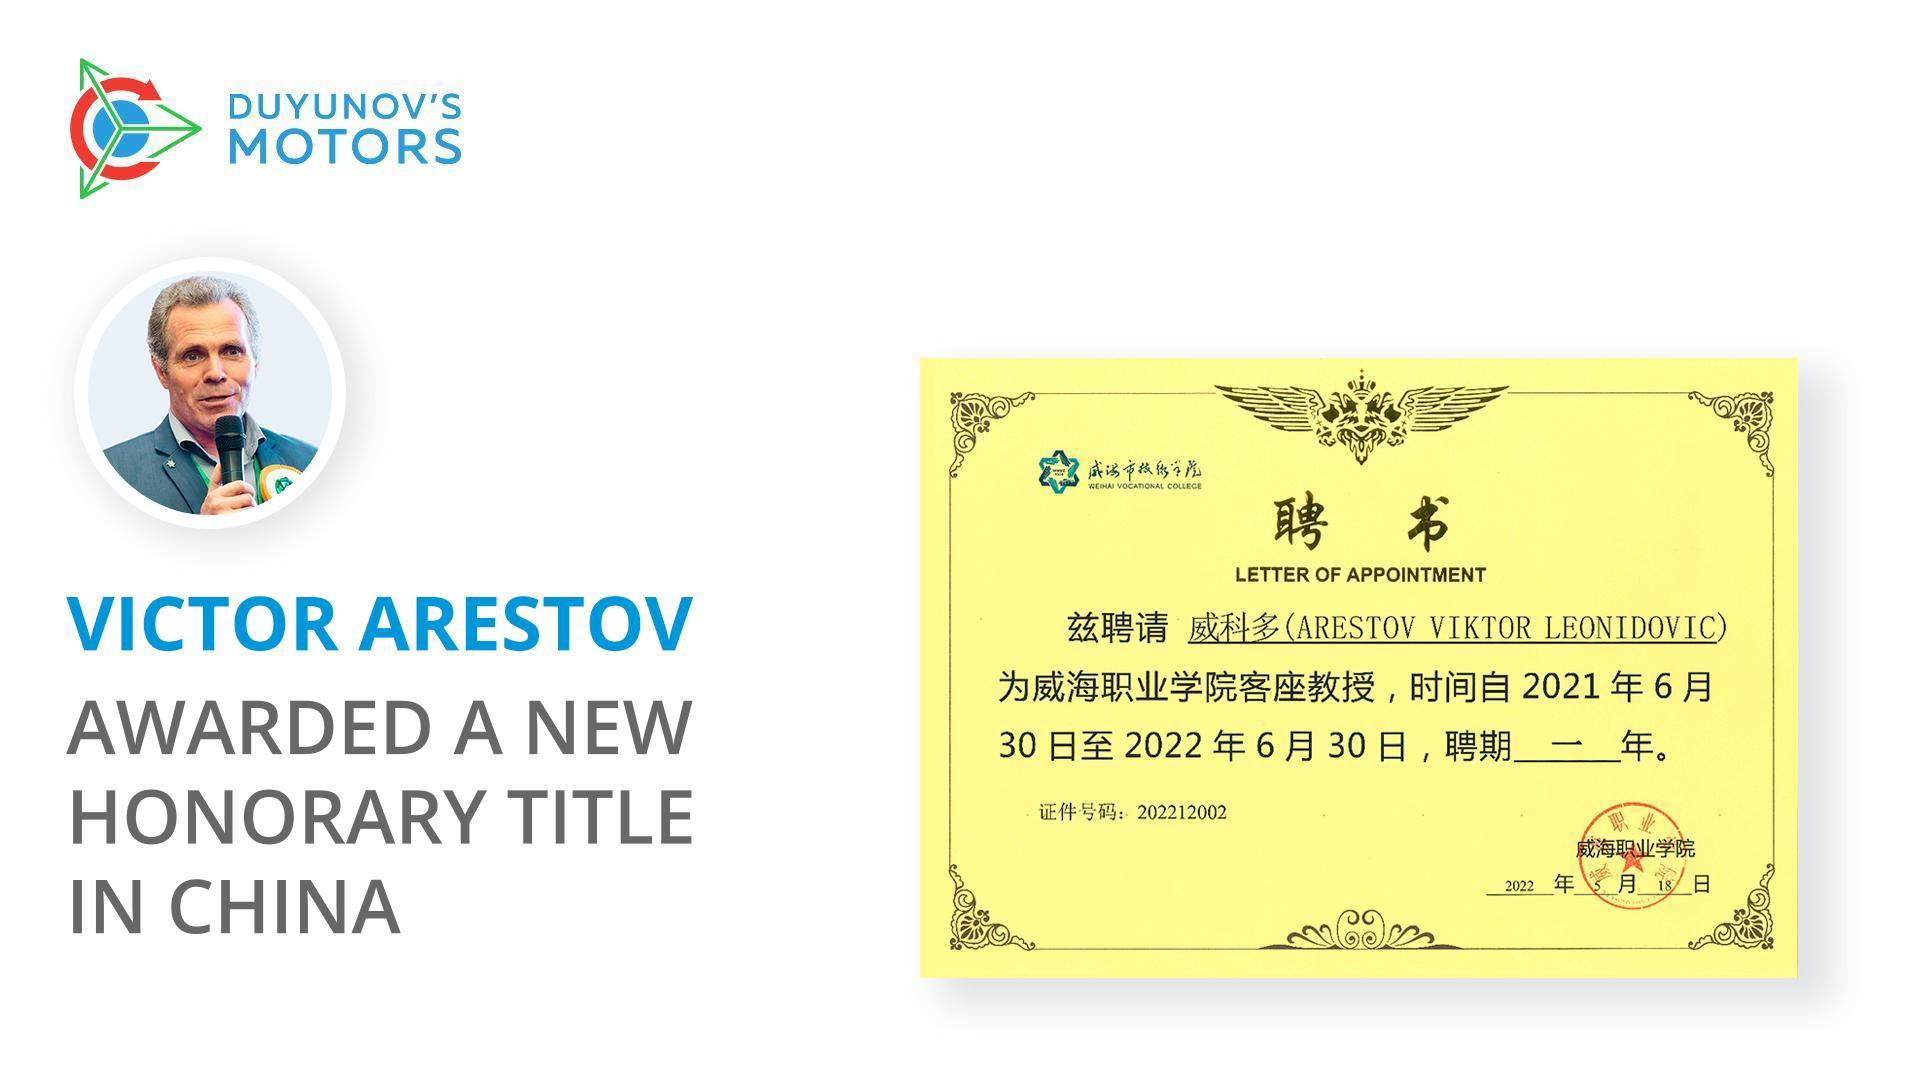 Victor Arestov has been awarded a new honorary title in China